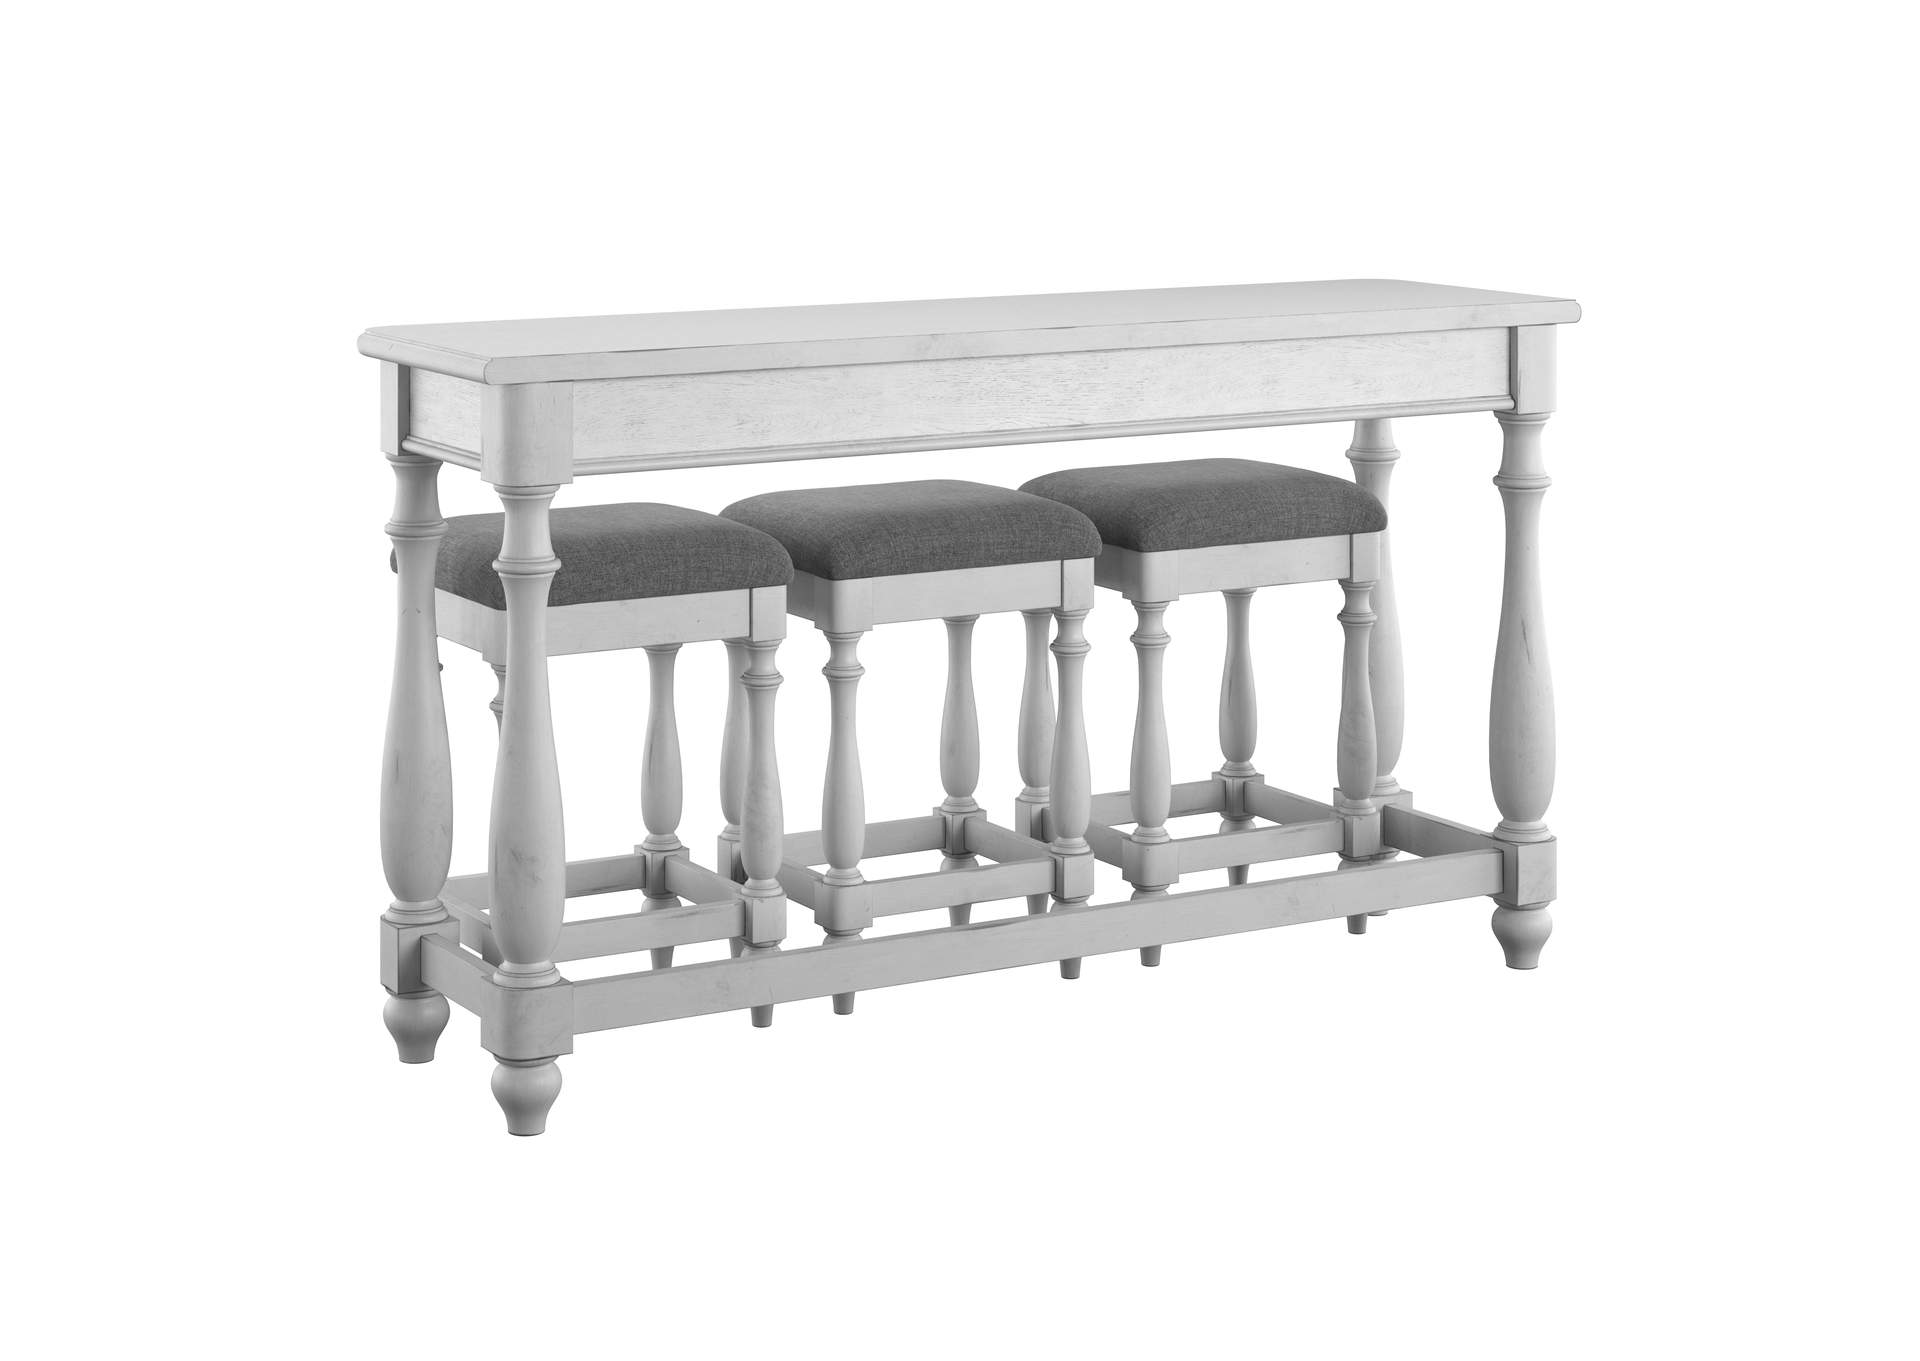 New Haven Sofa Table With Three Stools,Emerald Home Furnishings